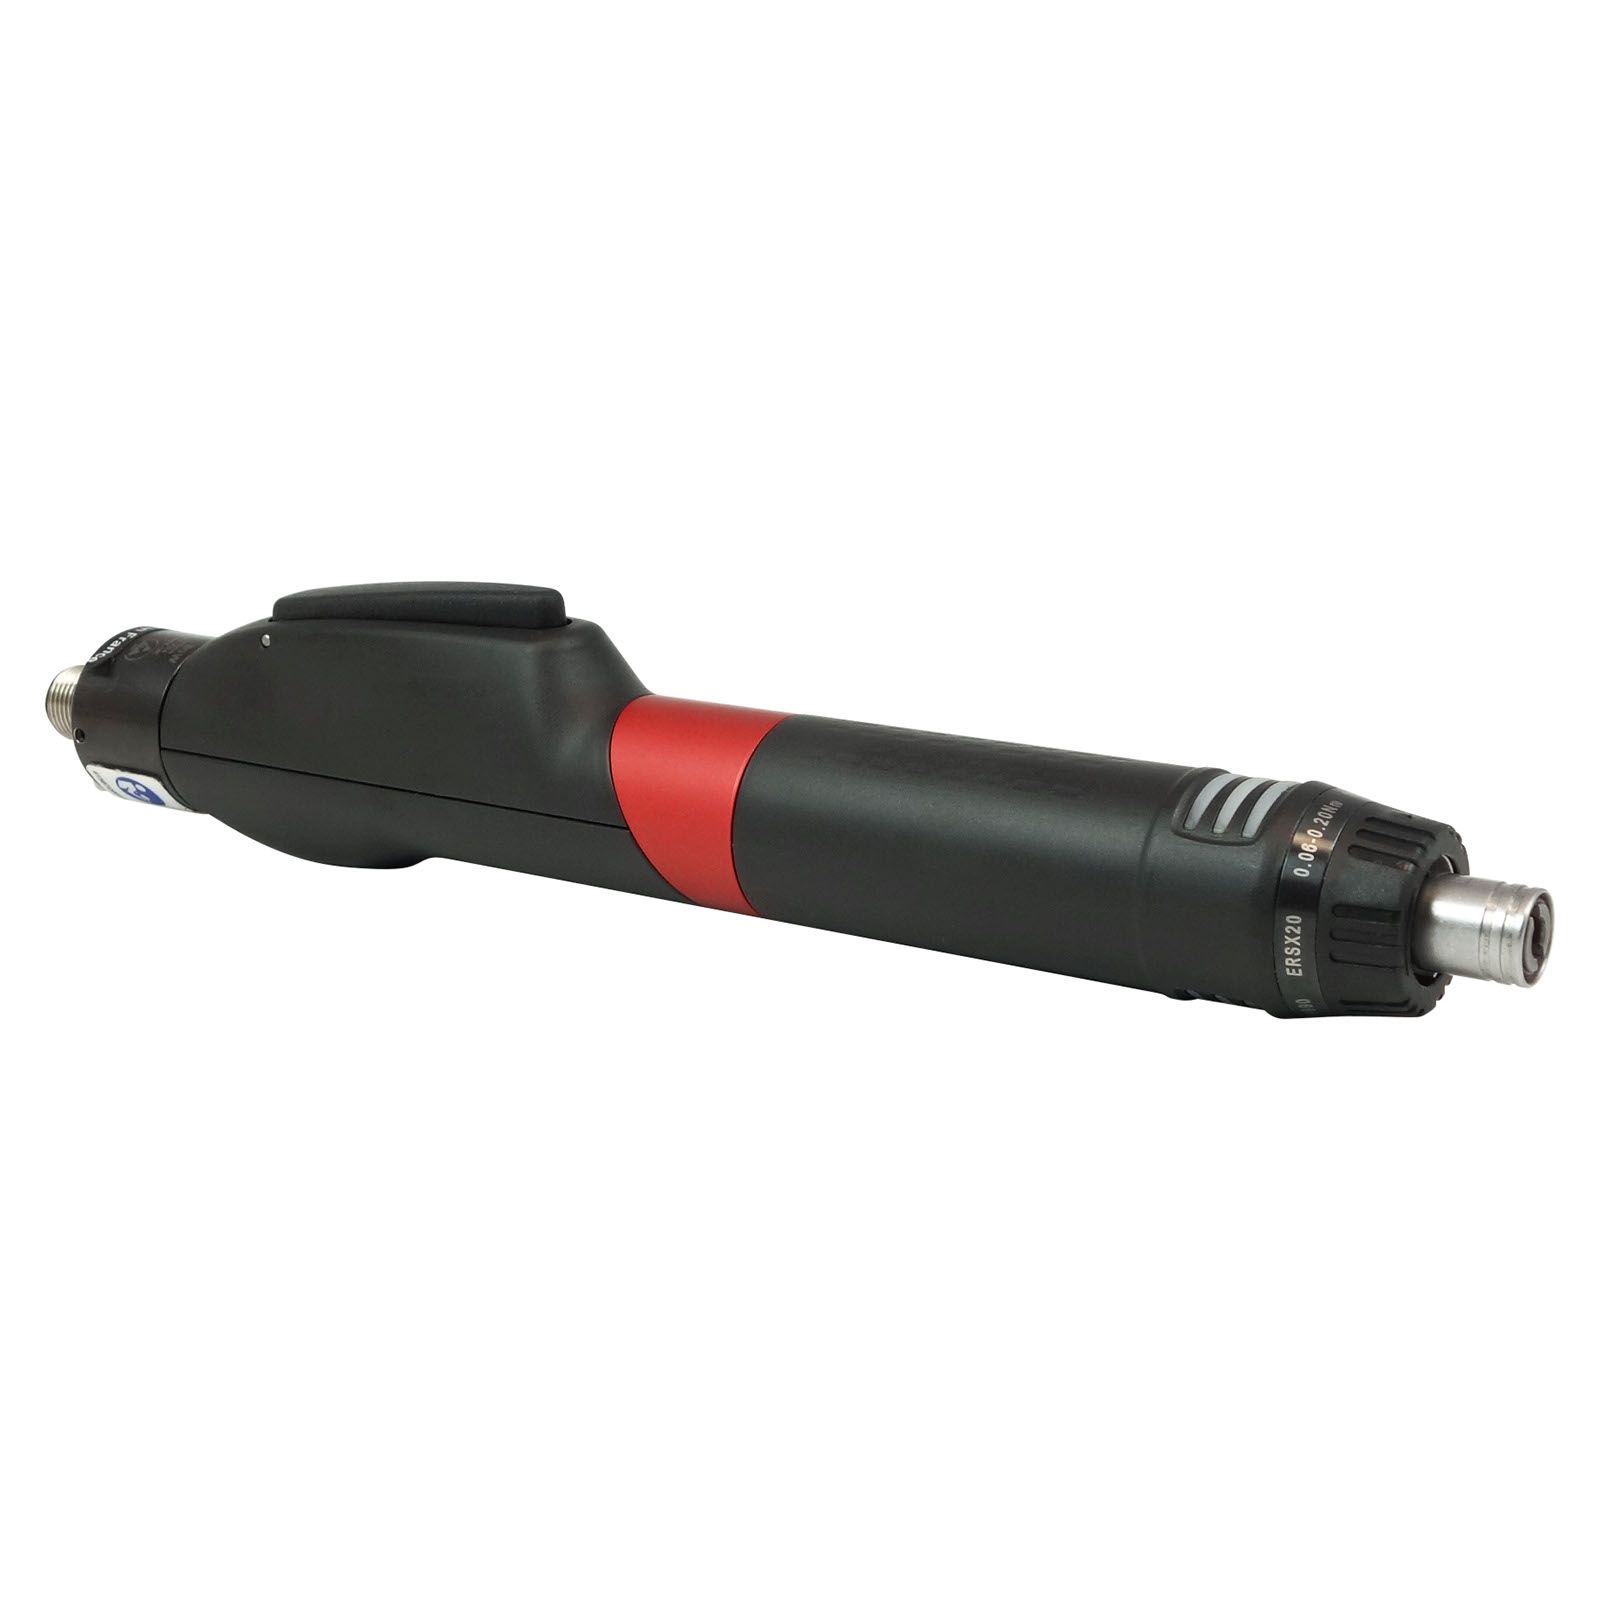 ERXS - Tranducerized In-line low torque screwdriver product photo